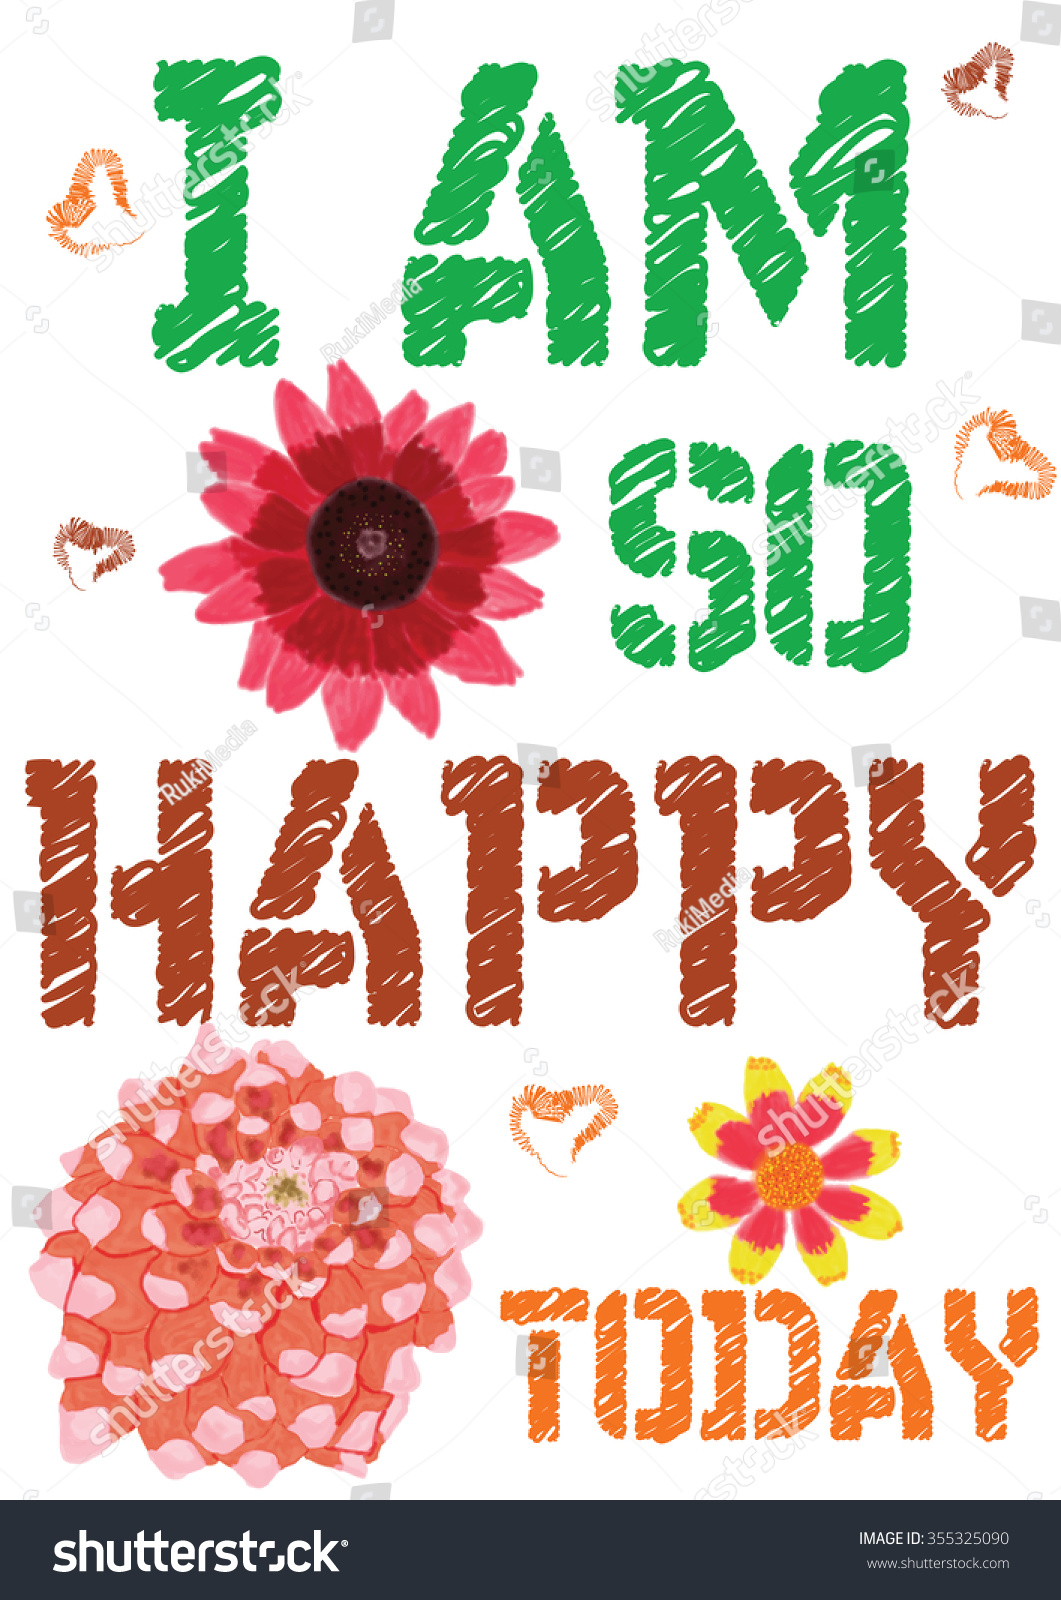 Colorful Tshirt Graphic Design Happy Today Stock Vector Royalty Free